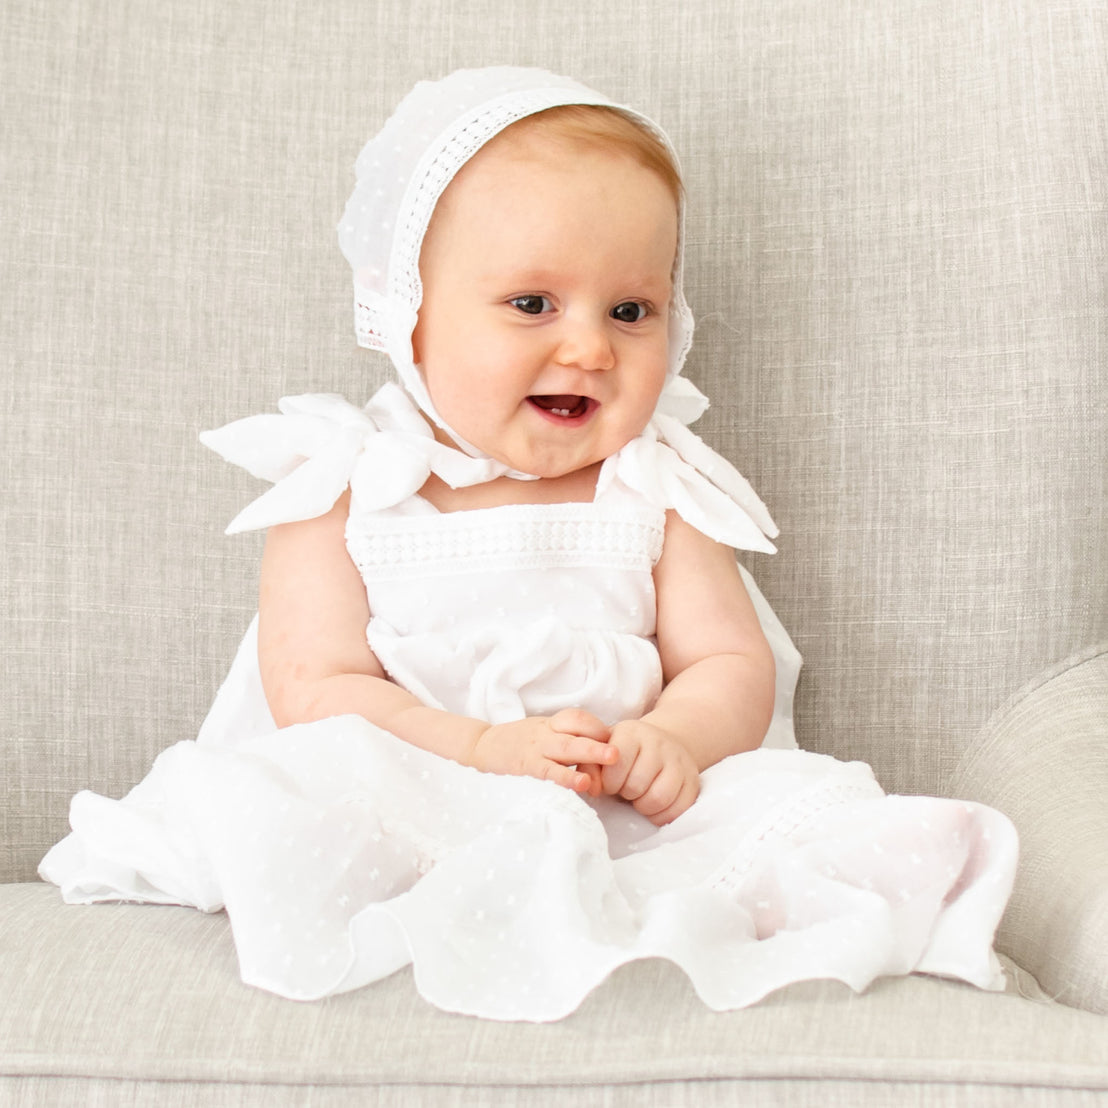 A joyful baby girl wearing the Mila Cotton Gown & Bonnet sits on a grey sofa, smiling and looking to the side with a playful expression.